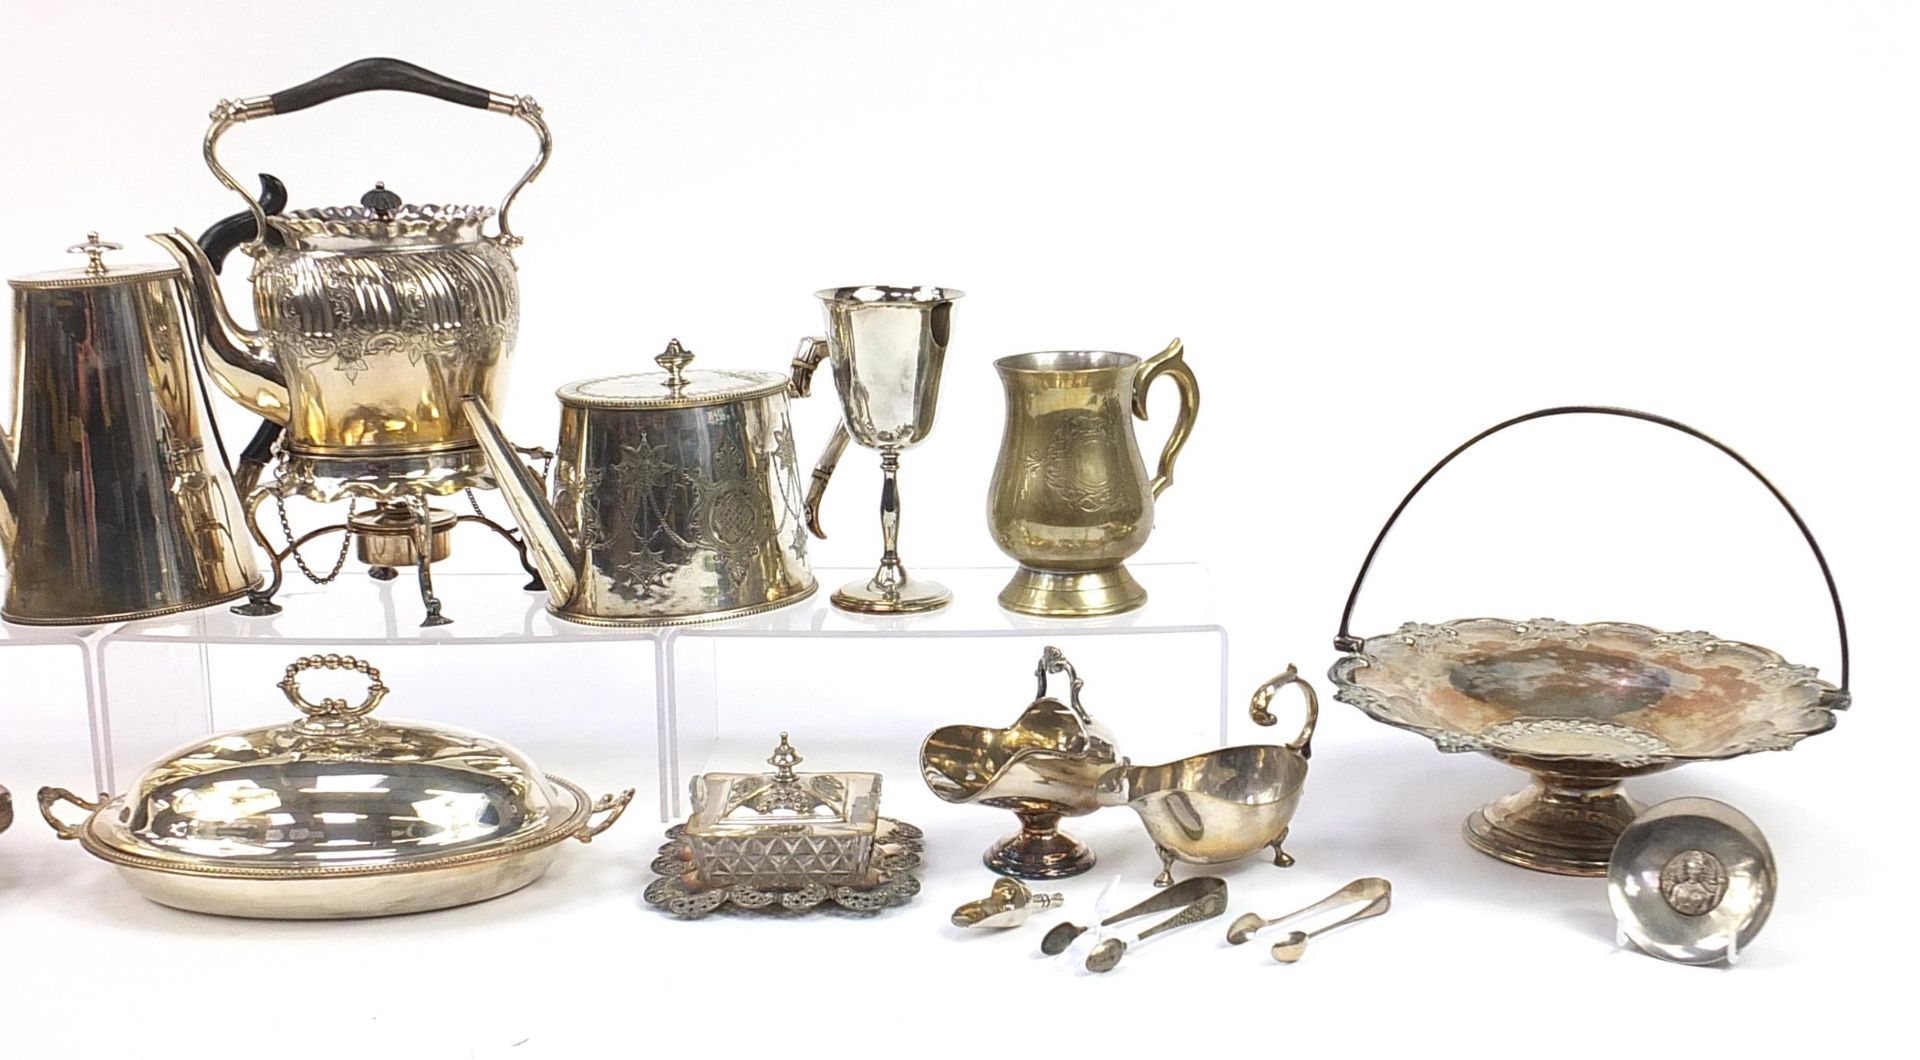 Antique and later silverplate including a Victorian teapot on stand, fruit baskets with swing - Image 3 of 4